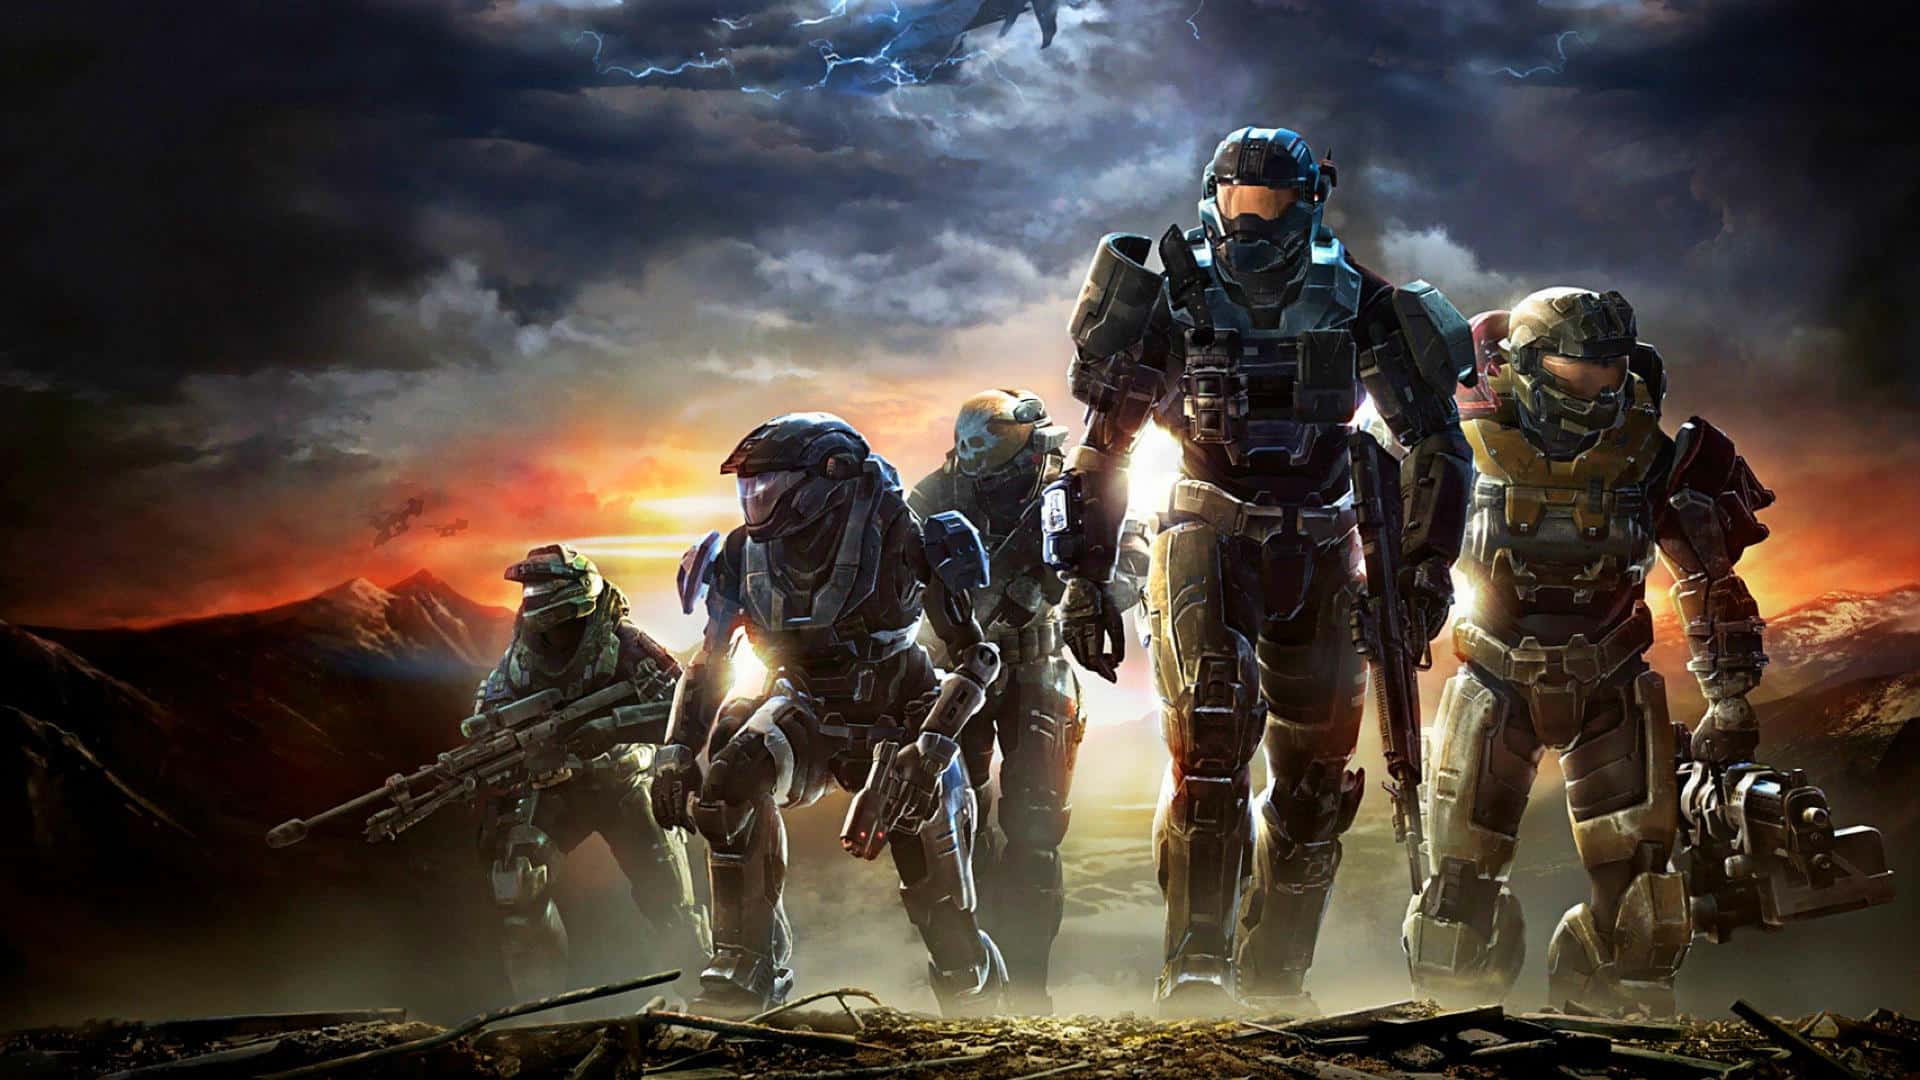 Halo - Reach may fall but Spartans never die. Learn a